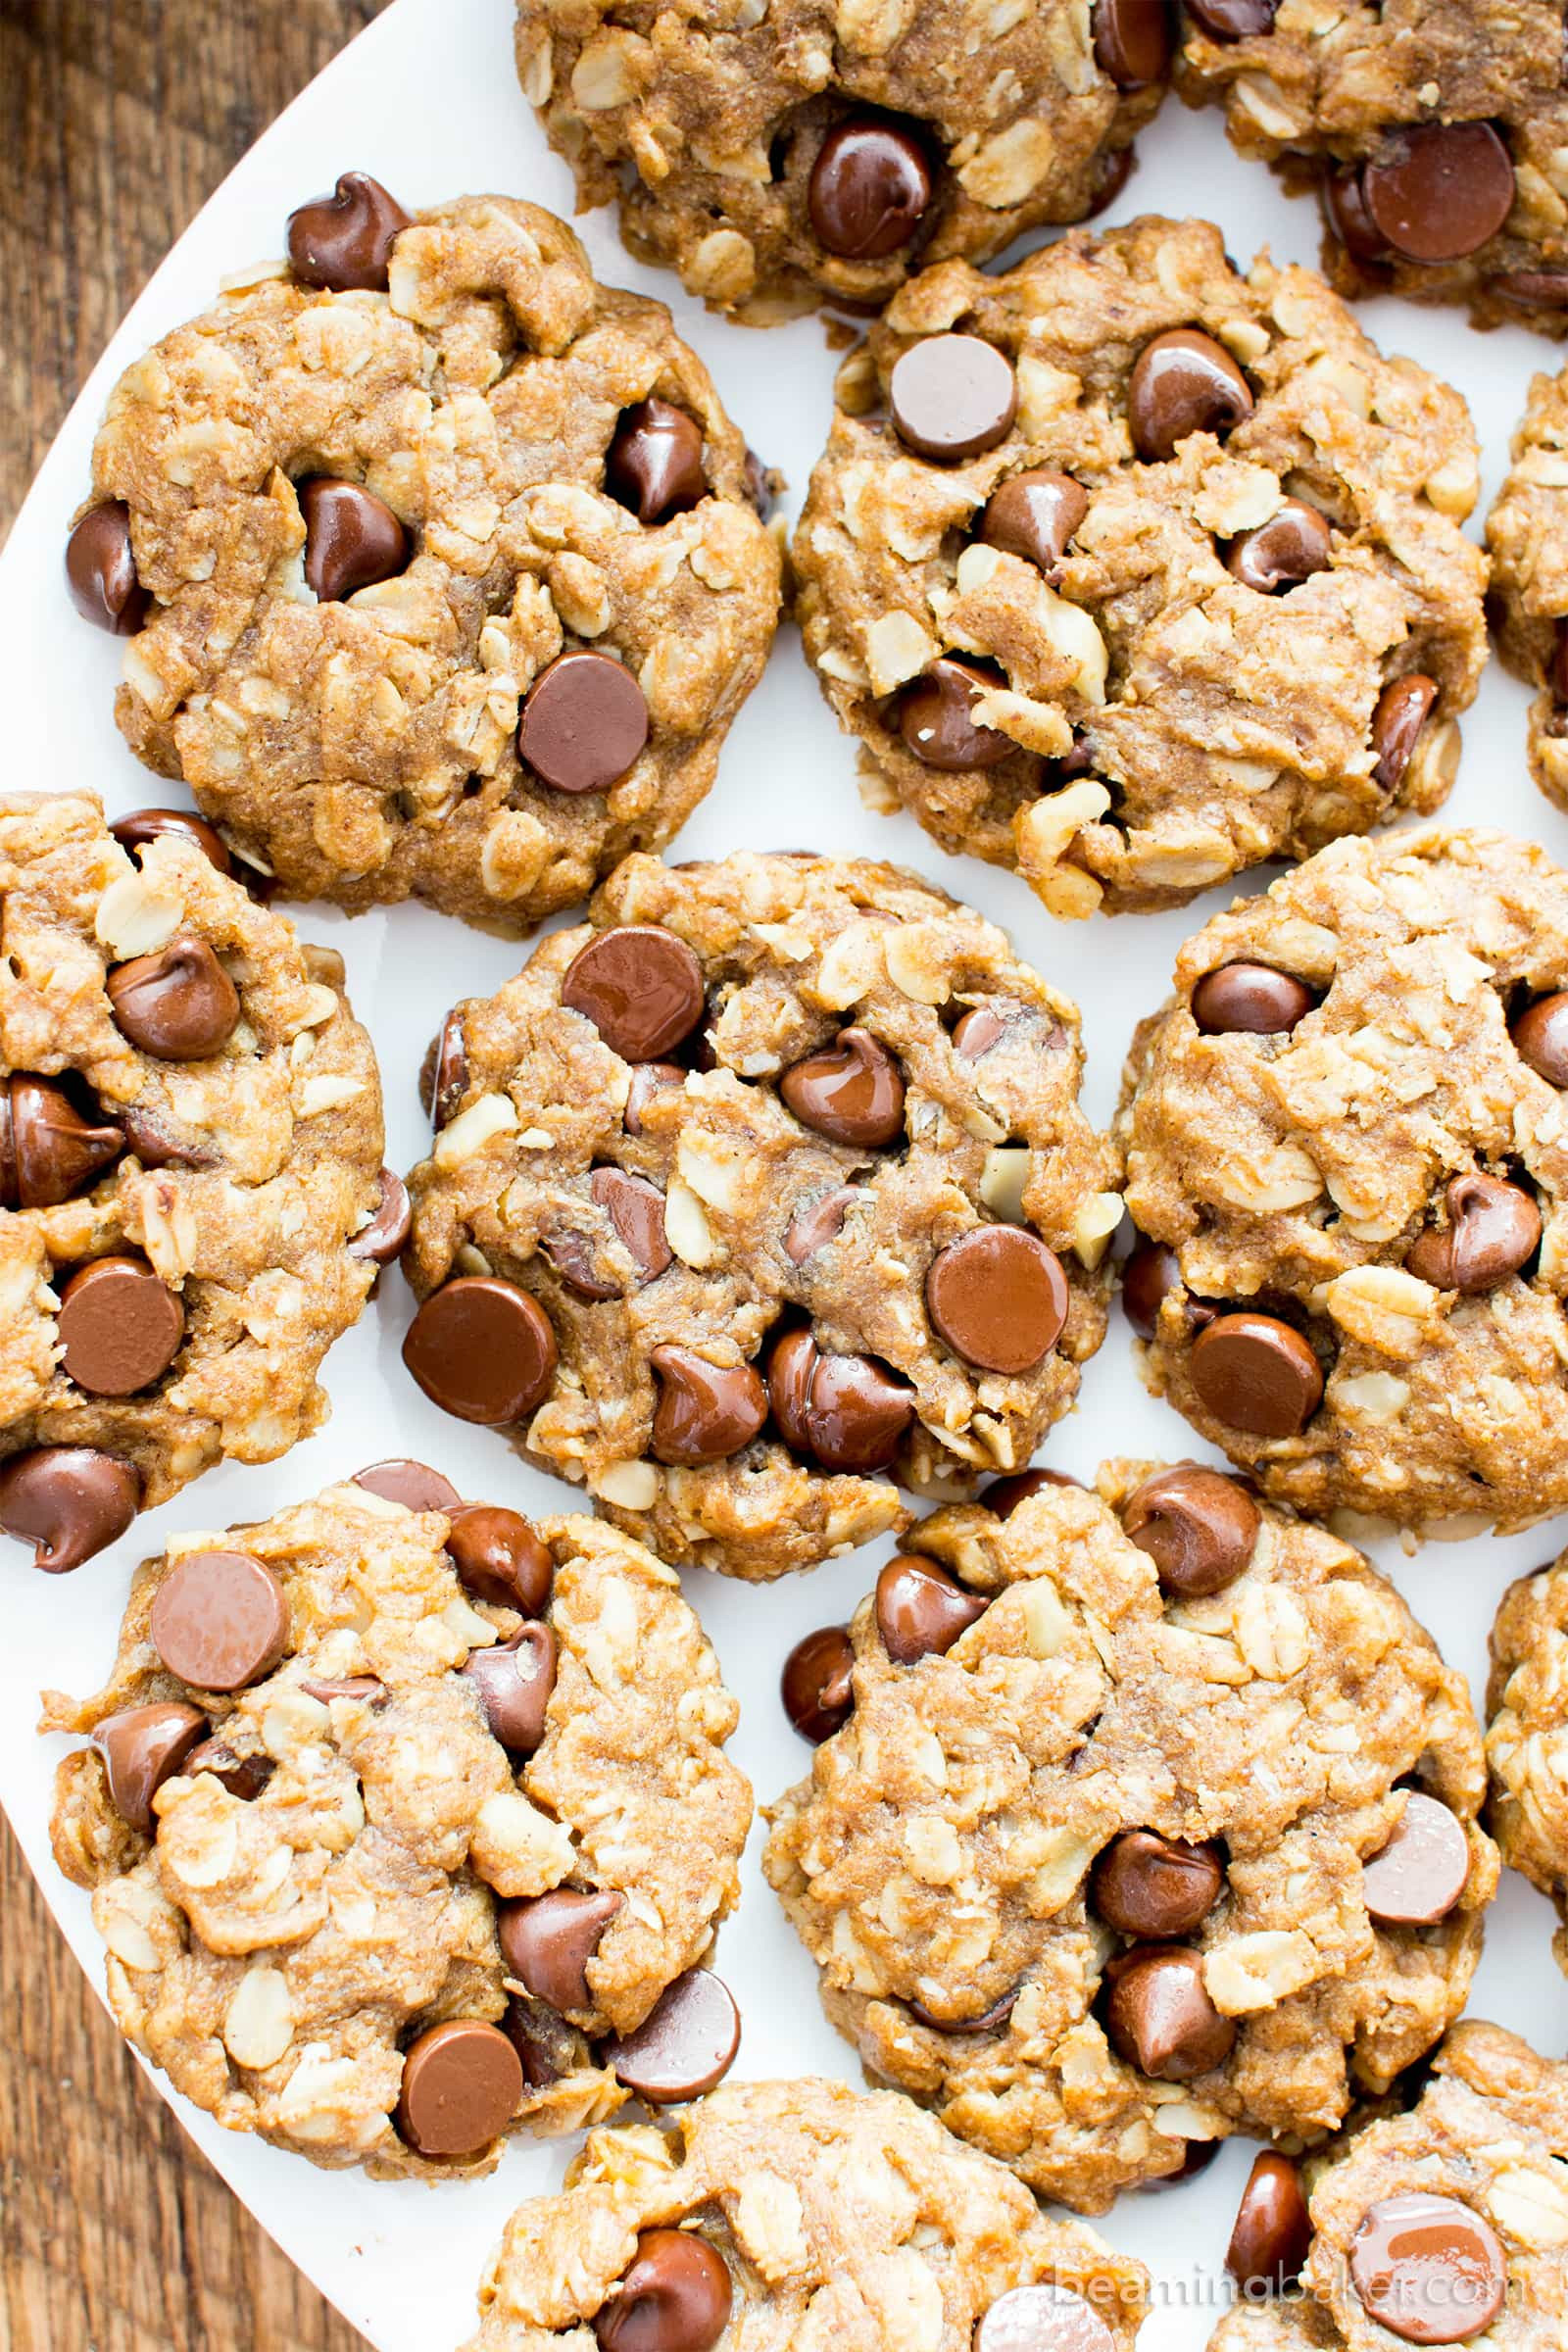 Healthy Oatmeal Peanut Butter Chocolate Chip Cookies
 healthy oatmeal peanut butter chocolate chip cookies recipe